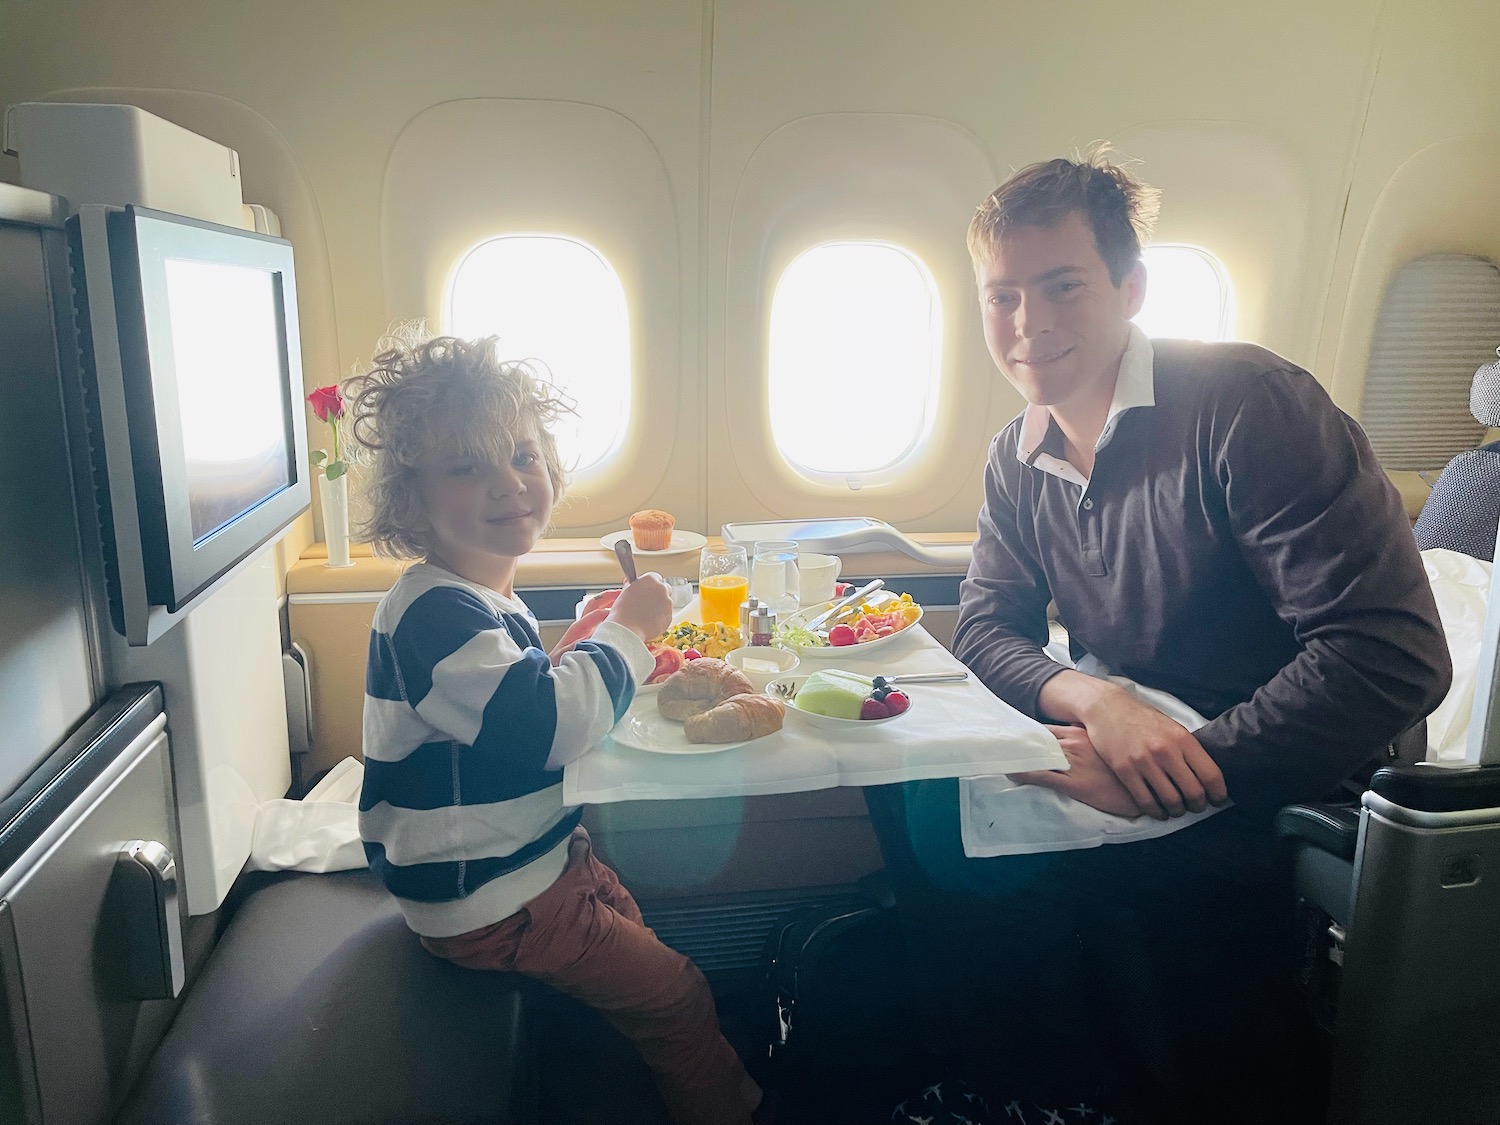 a man and child sitting at a table in an airplane